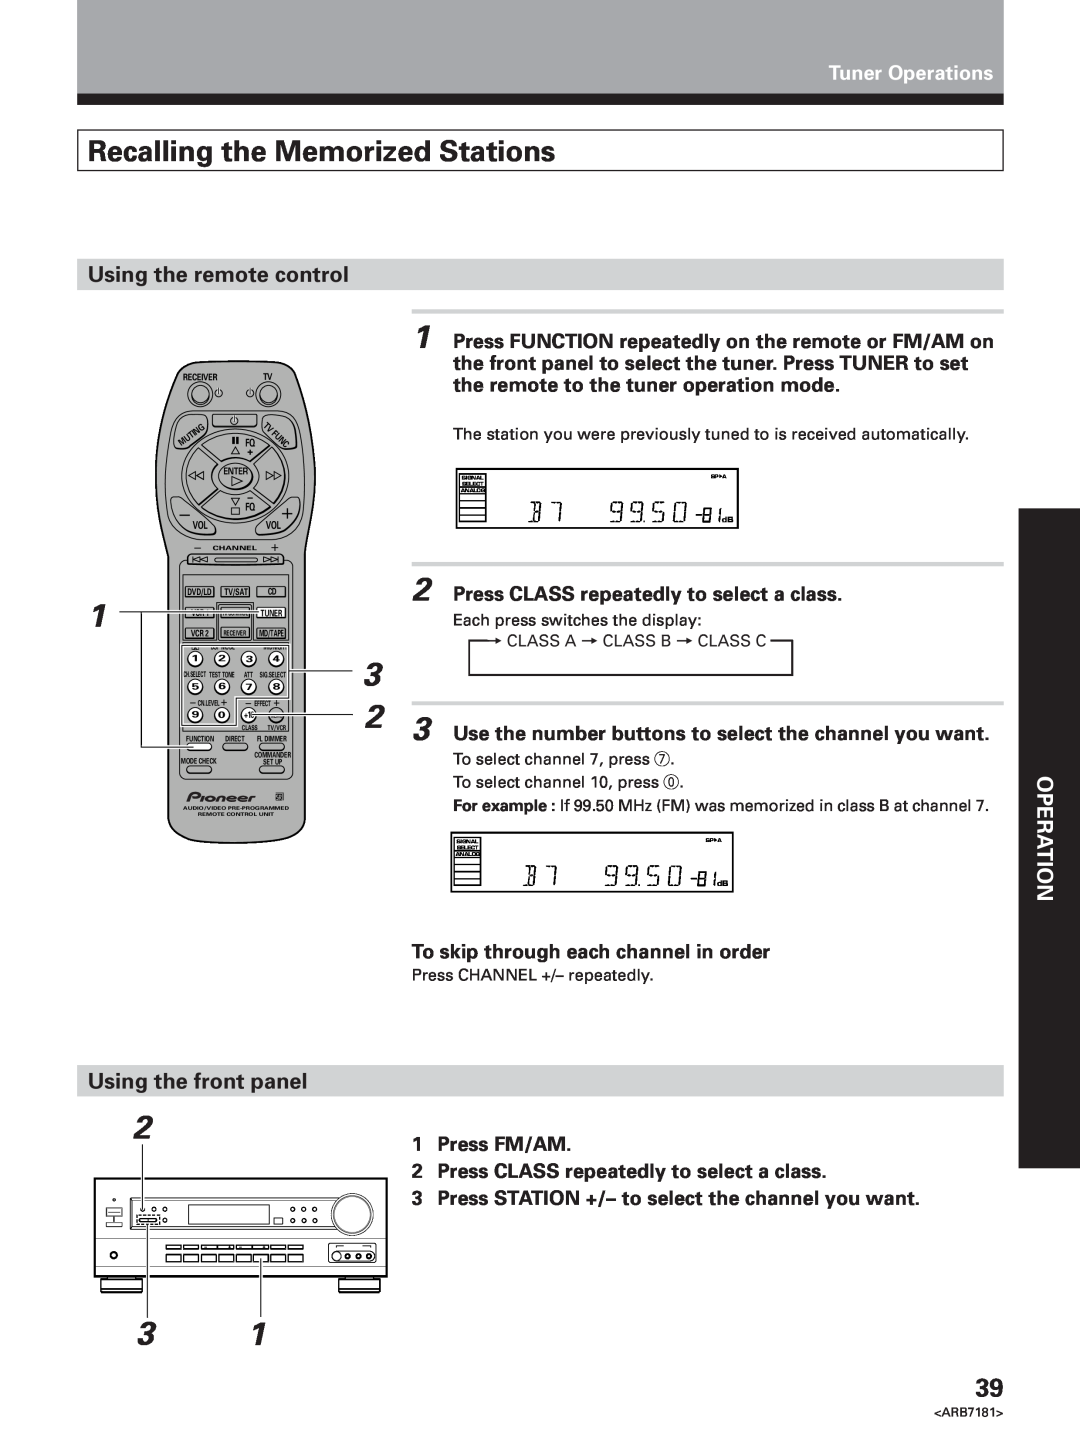 Pioneer VSX-21 manual Recalling the Memorized Stations, Using the remote control, Using the front panel, Set Up Operation 